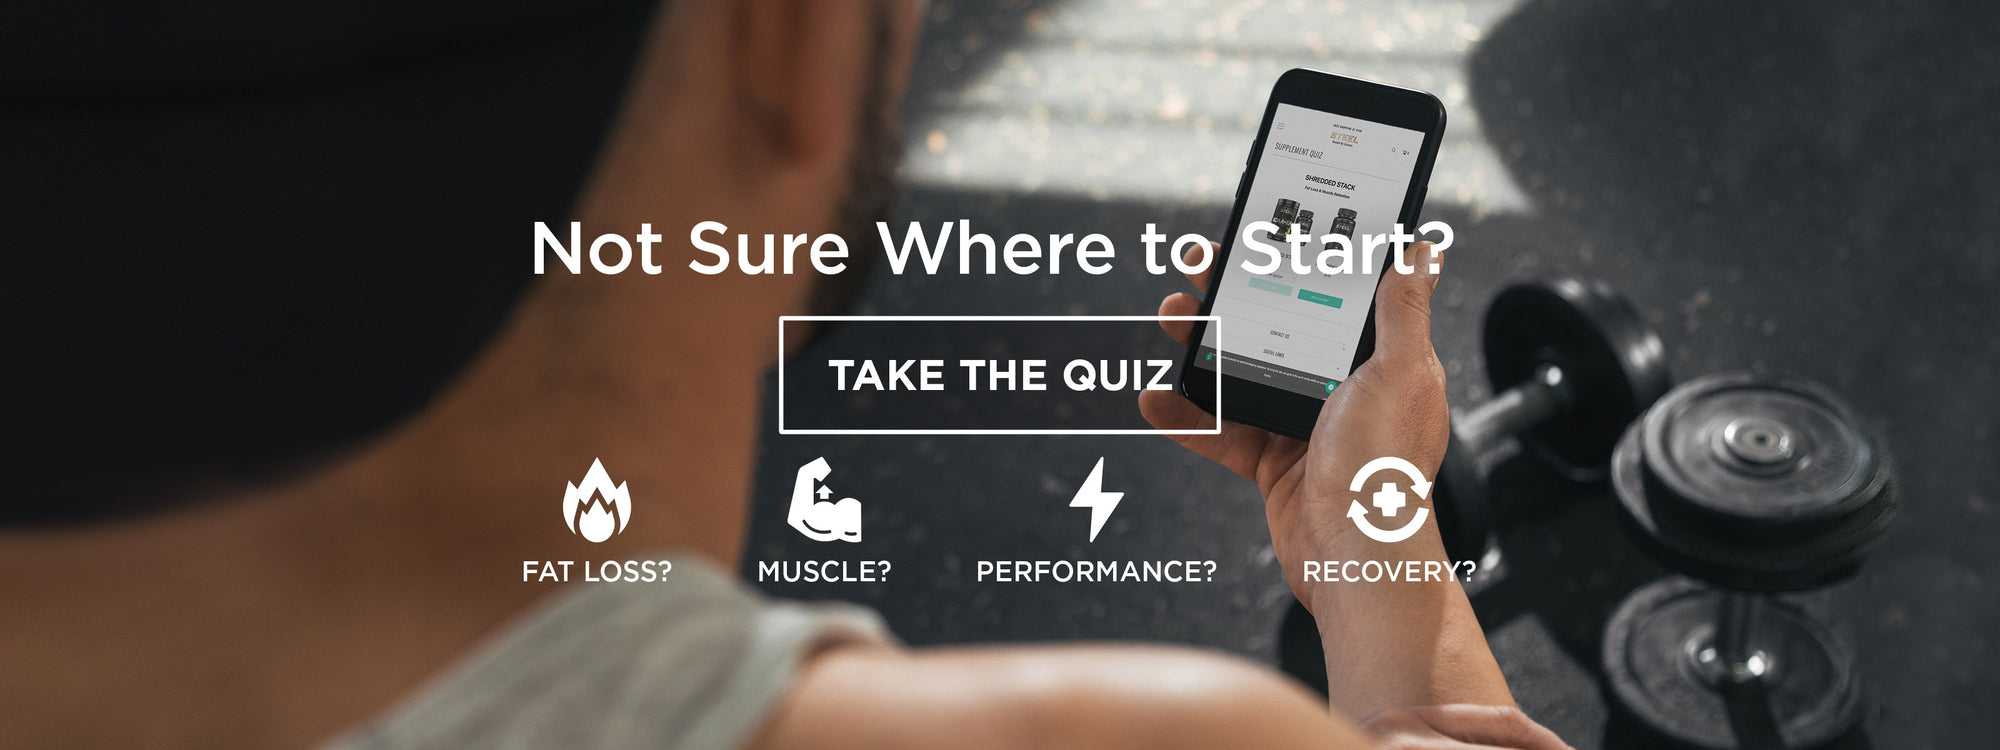 Not sure where to start? take the quiz, fat loss? muscle? preformace? recovery?